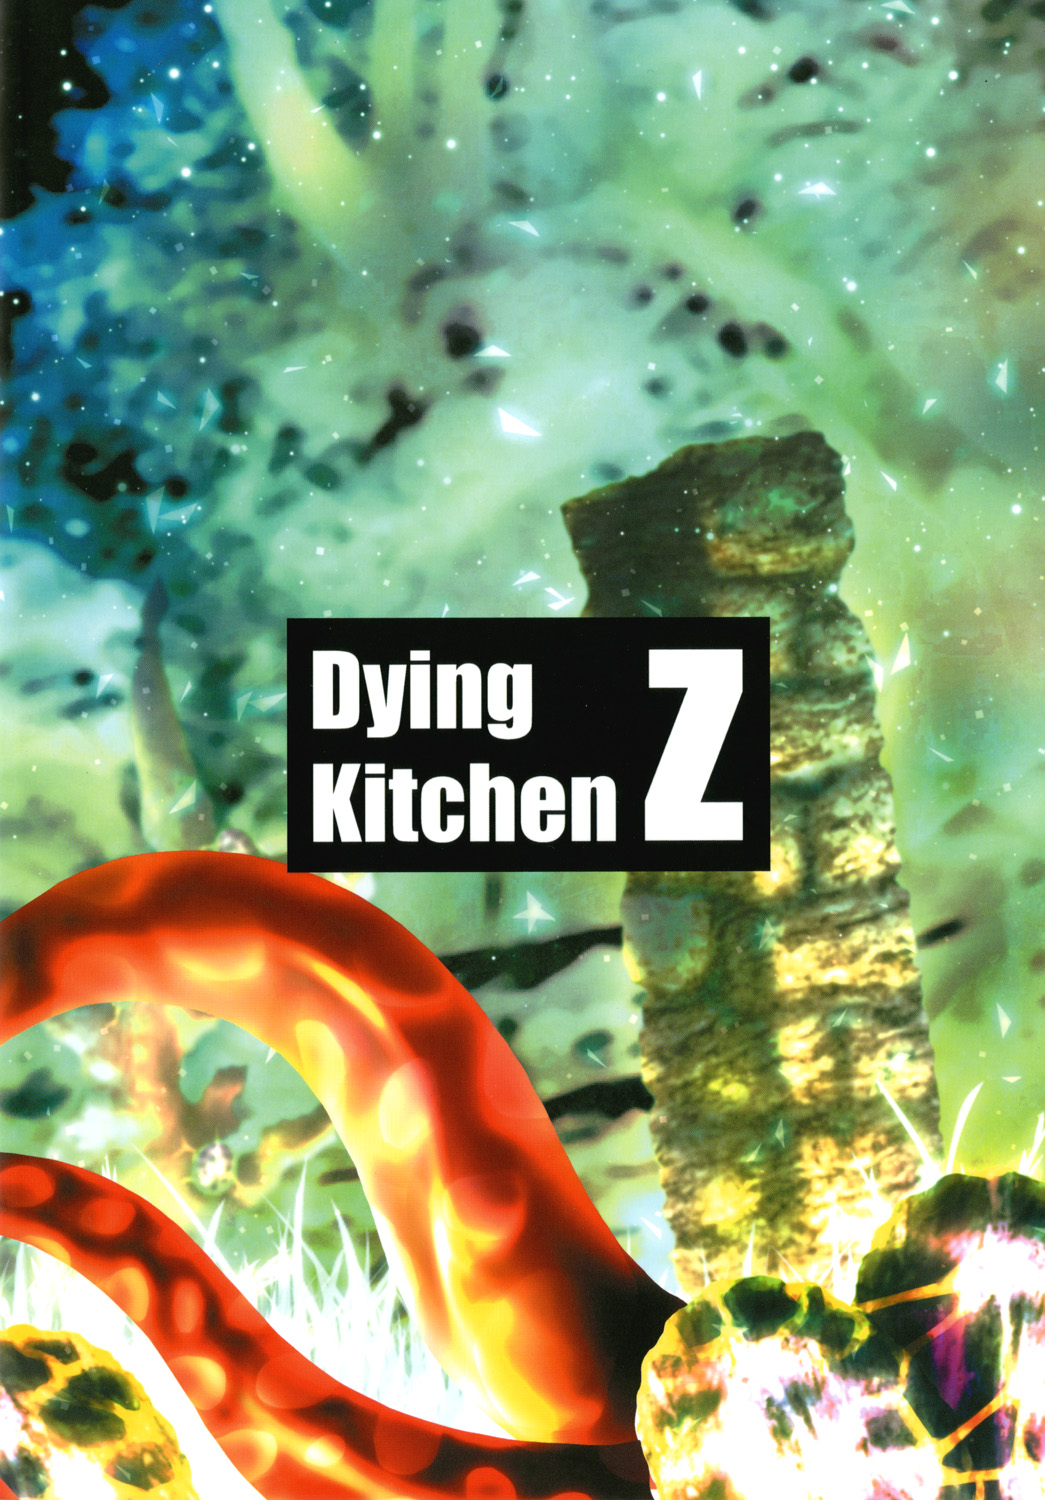 [Dying Kitchen Z (仮死パン、めそうさん)] 古杜ノ恥沼 (東方Project) [DL版]